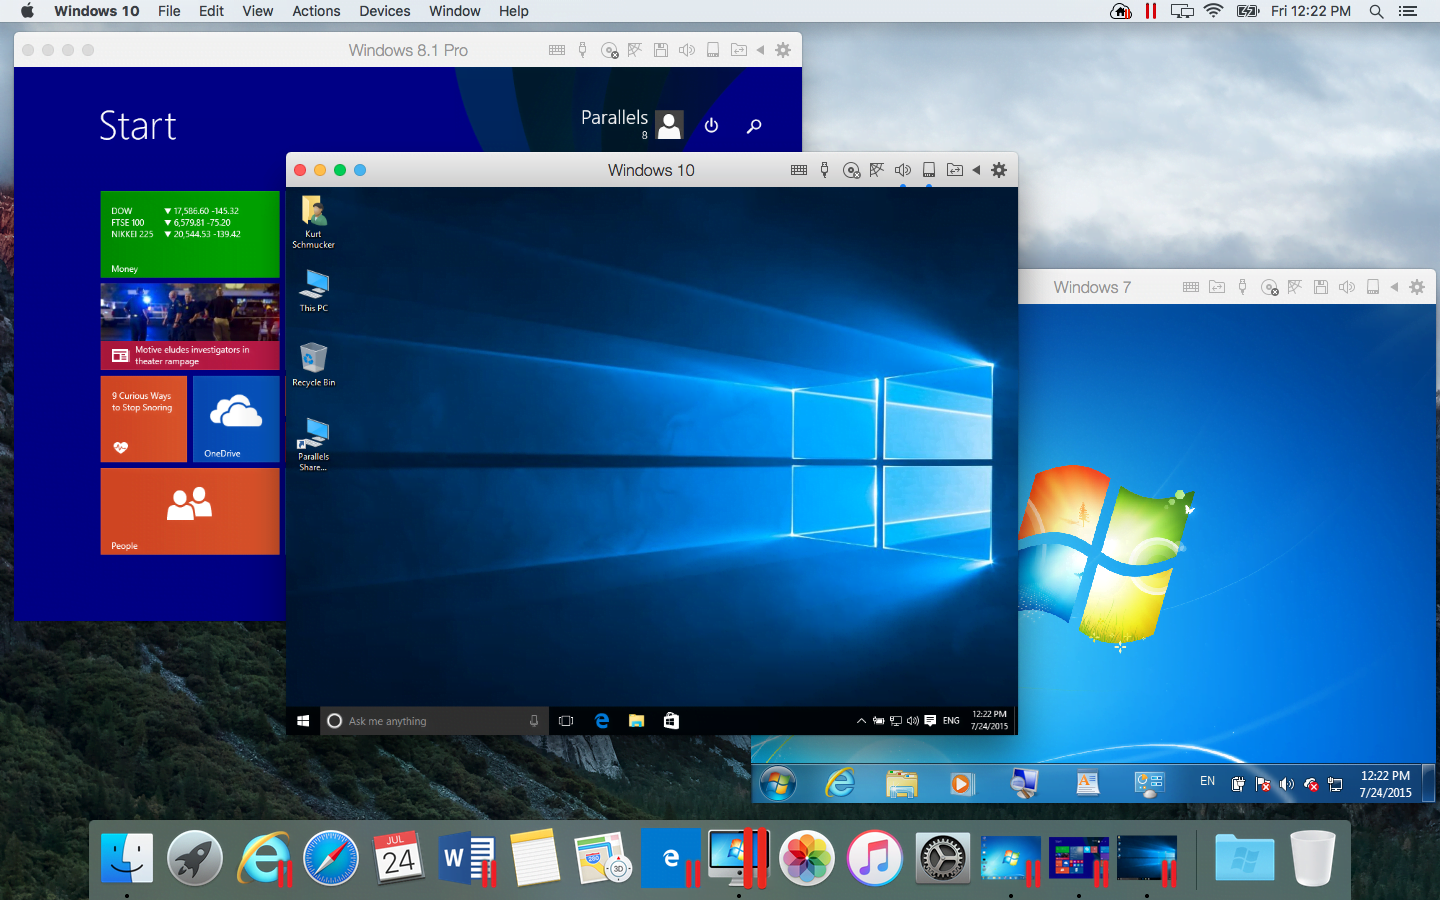 parallels for mac torrent 12